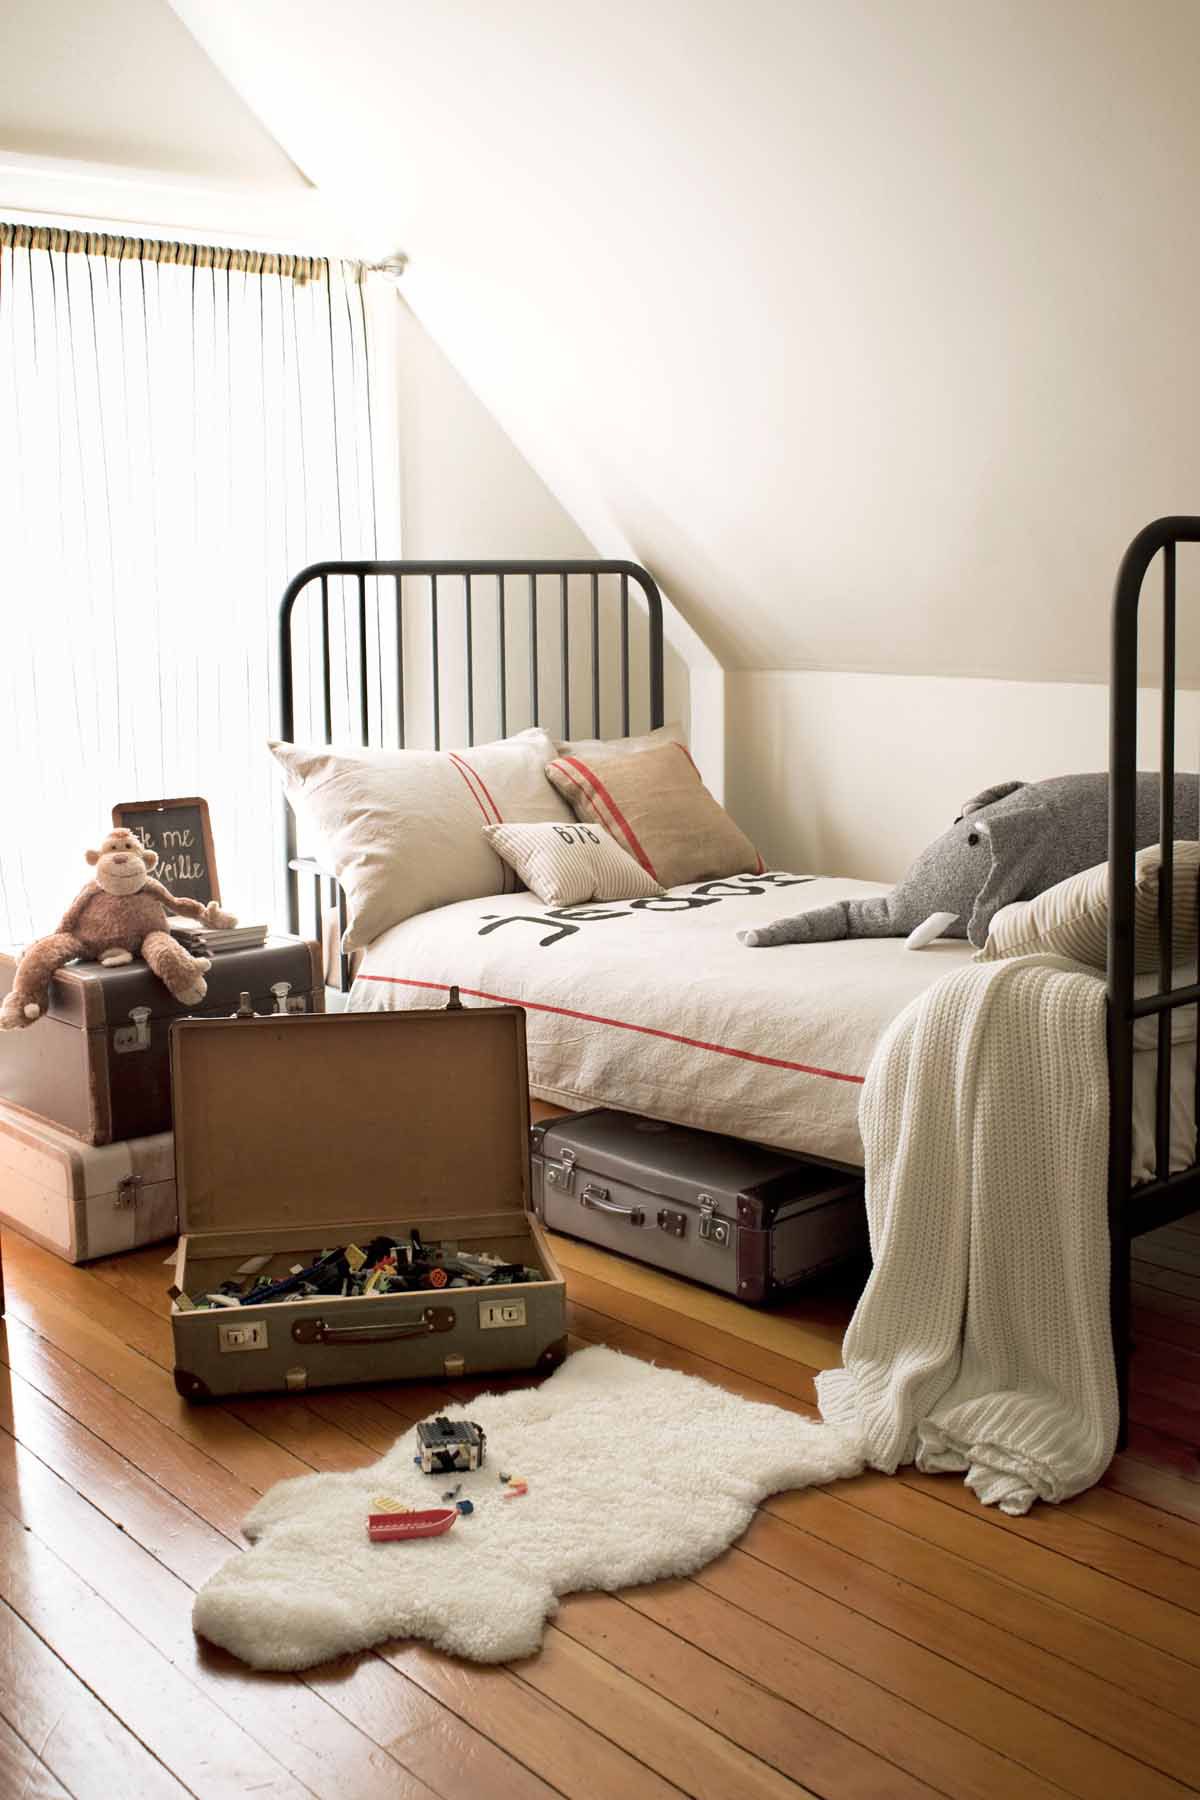 14 Best Boys Bedroom Ideas - Room Decor and Themes for a Little or